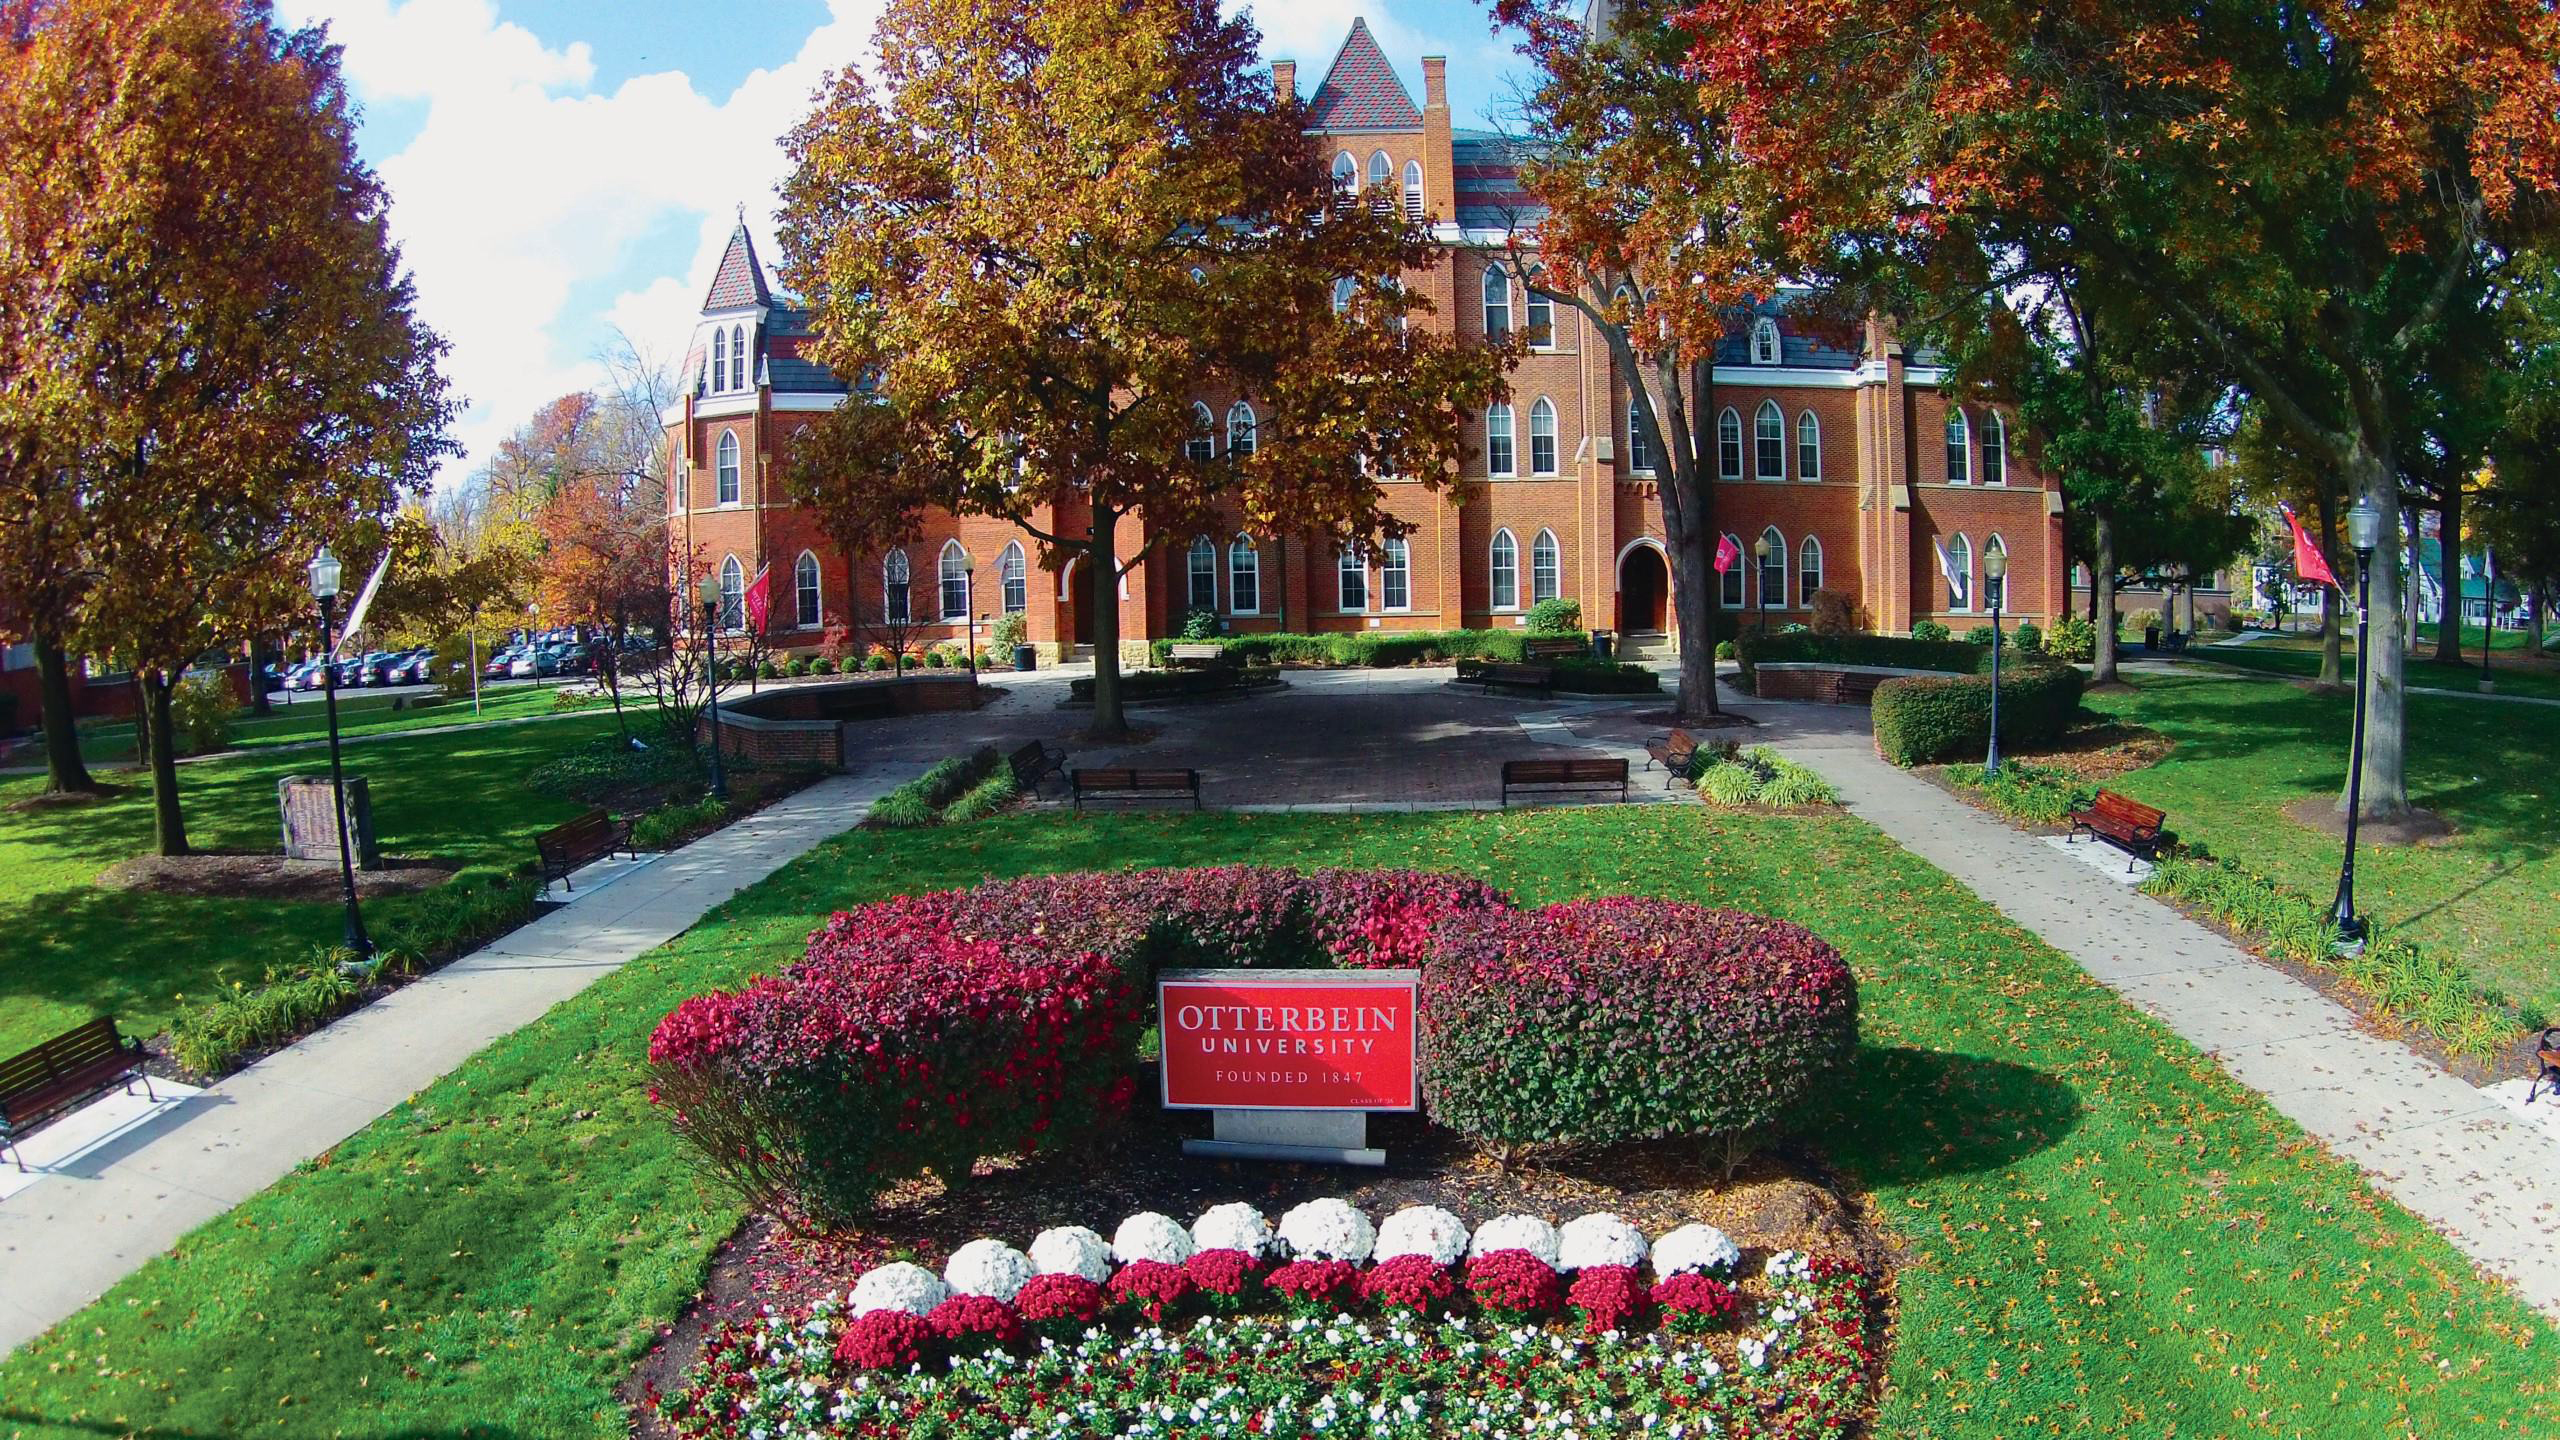 Otterbein University in Westerville, OH